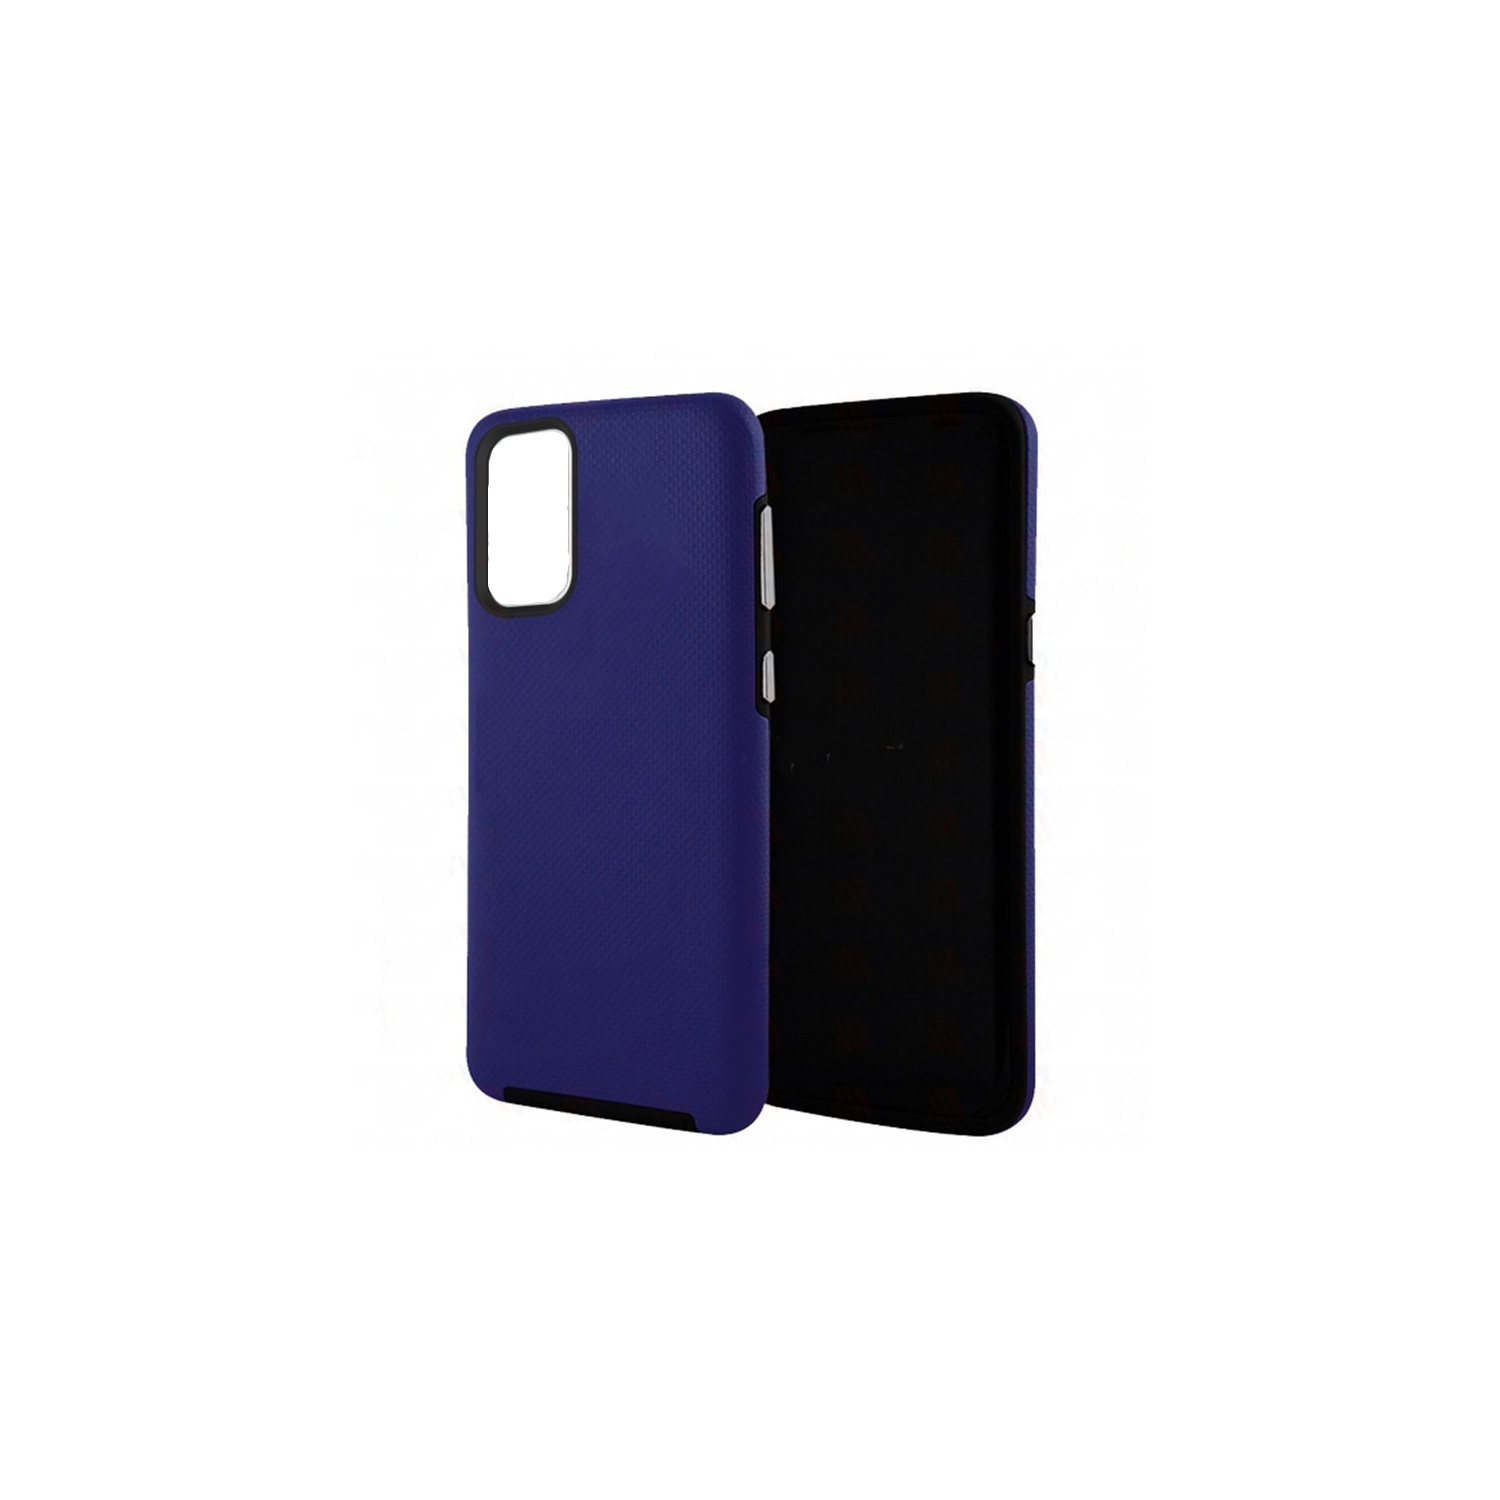 【CSmart】 Slim Fitted Hybrid Hard PC Shell Shockproof Scratch Resistant Case Cover for Samsung Galaxy A23 4G / 5G, Navy